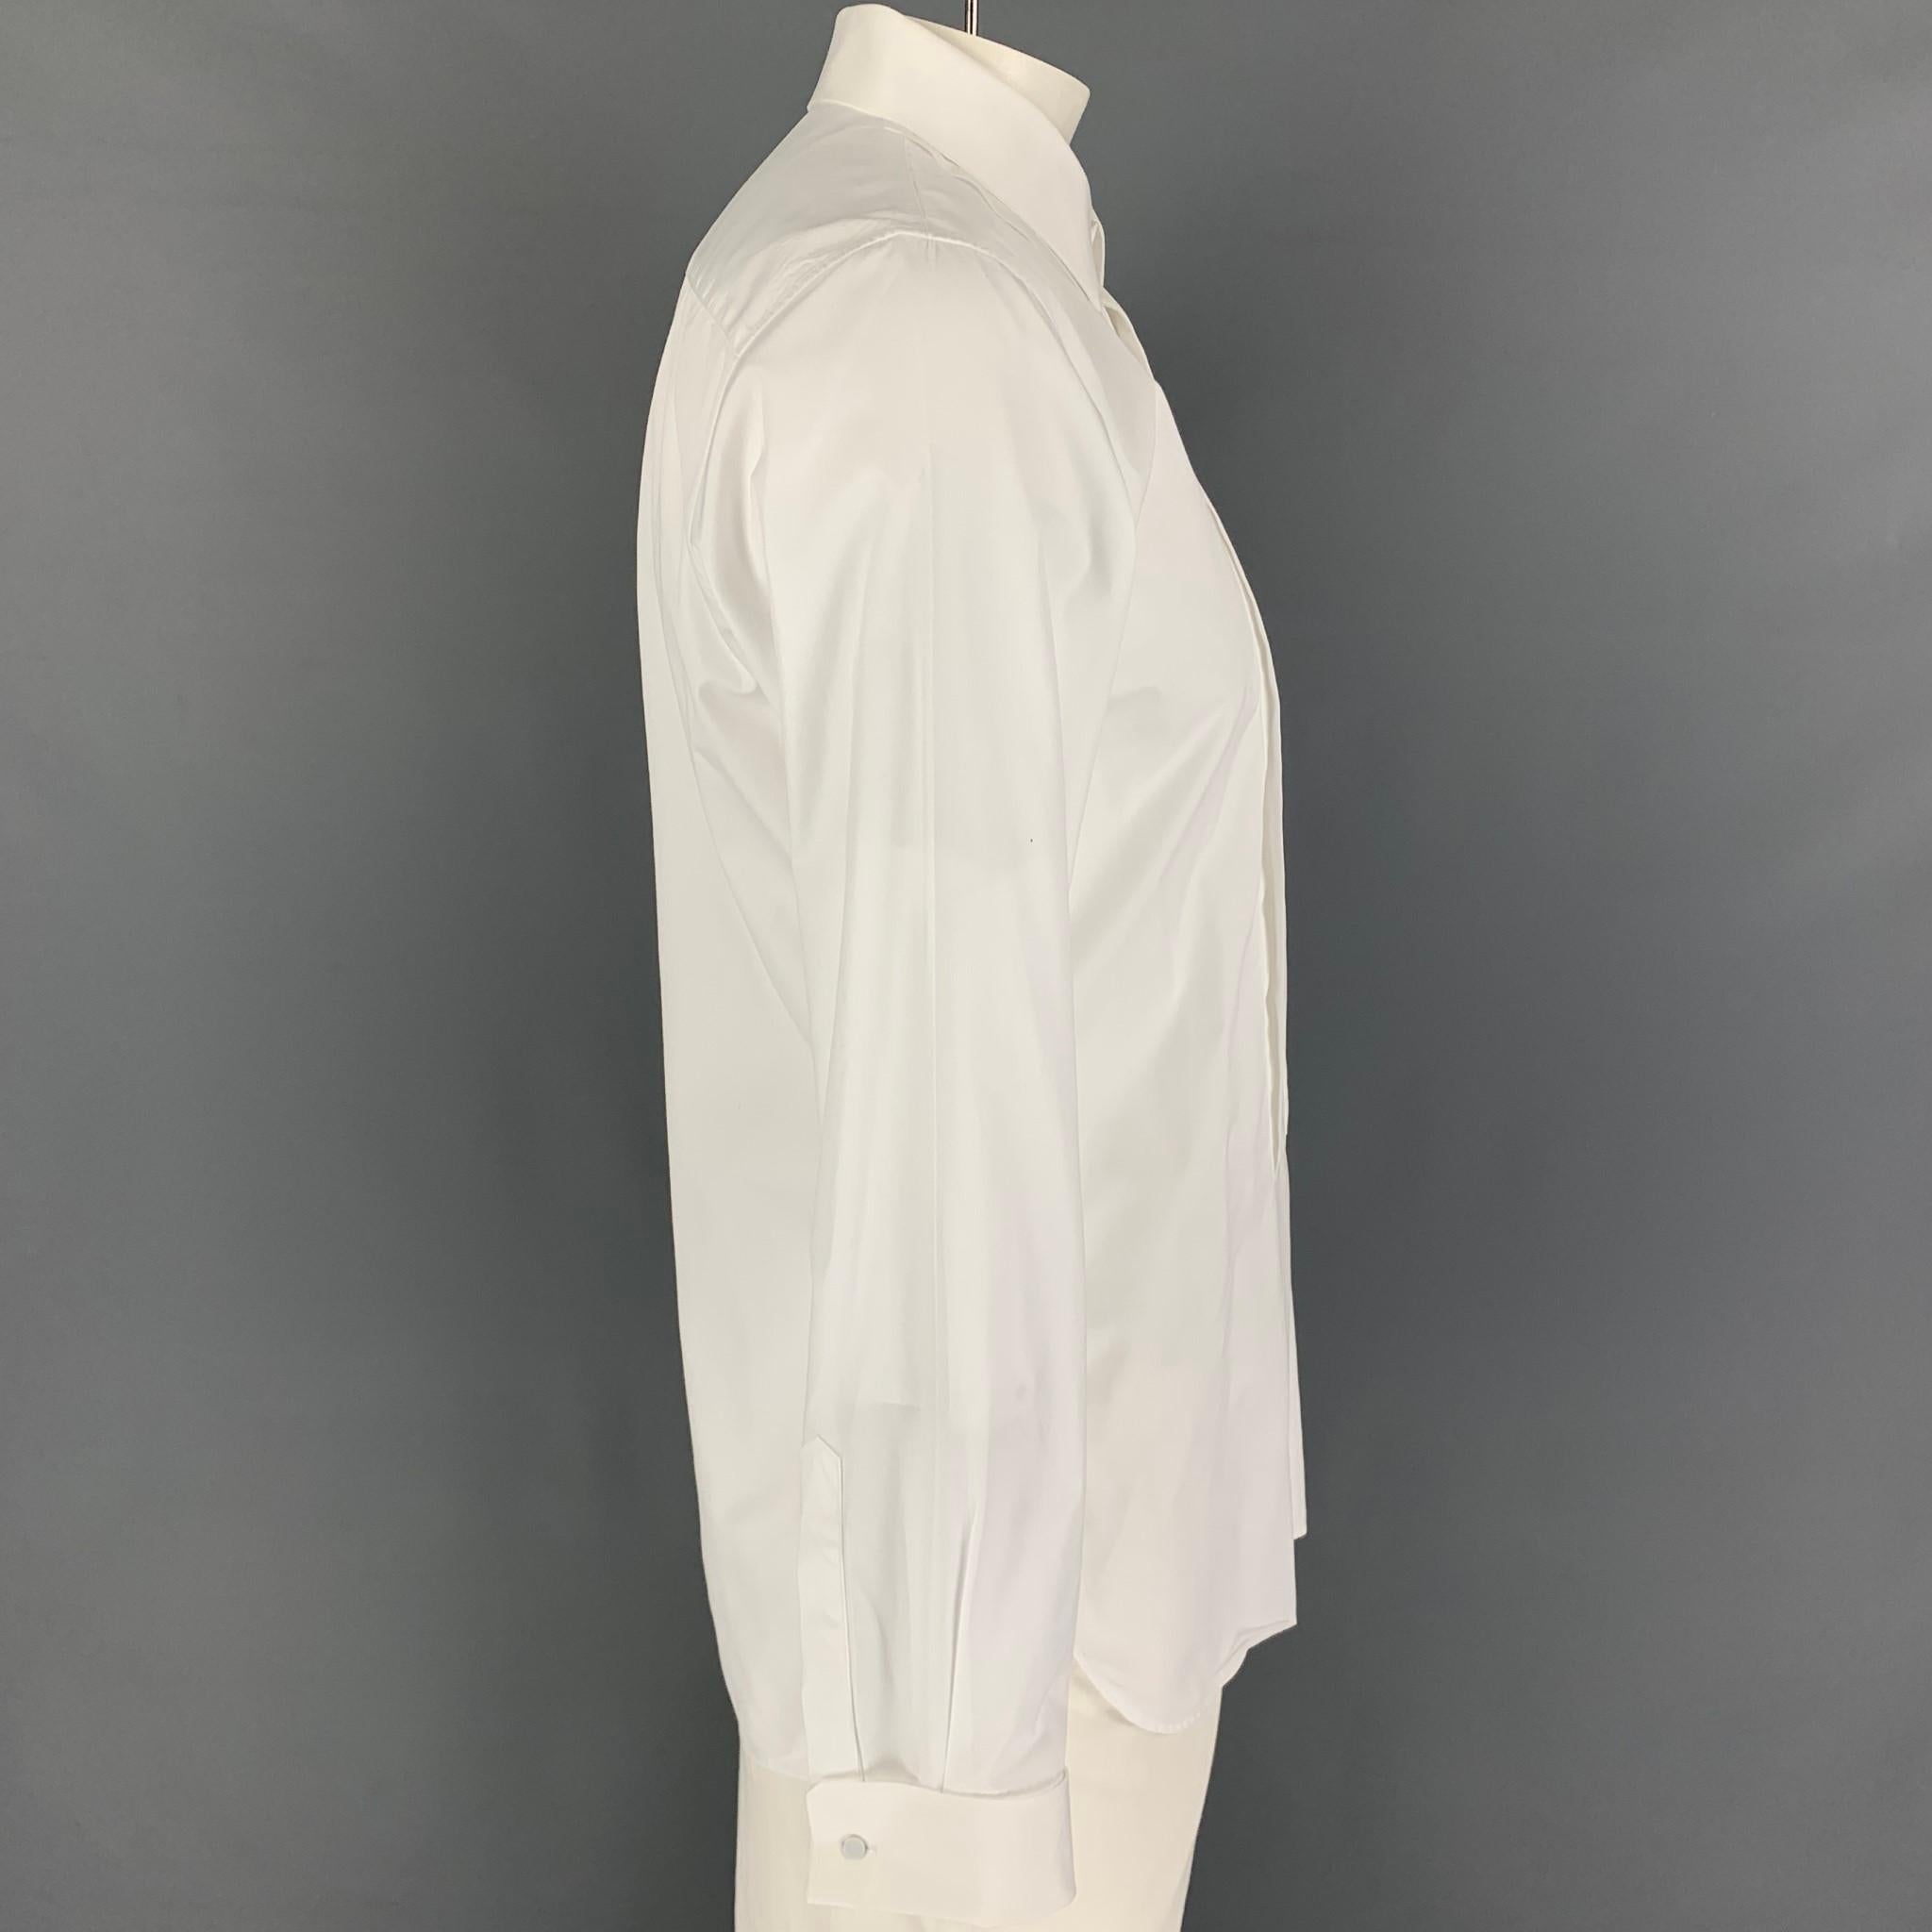 BURBERRY long sleeve shirt comes in a white cotton featuring a slim fit, pleated panel, french cuffs, spread collar, and a hidden placket closure. Made in Italy.

Excellent Pre-Owned Condition.
Marked: 17-43
Original Retail Price: